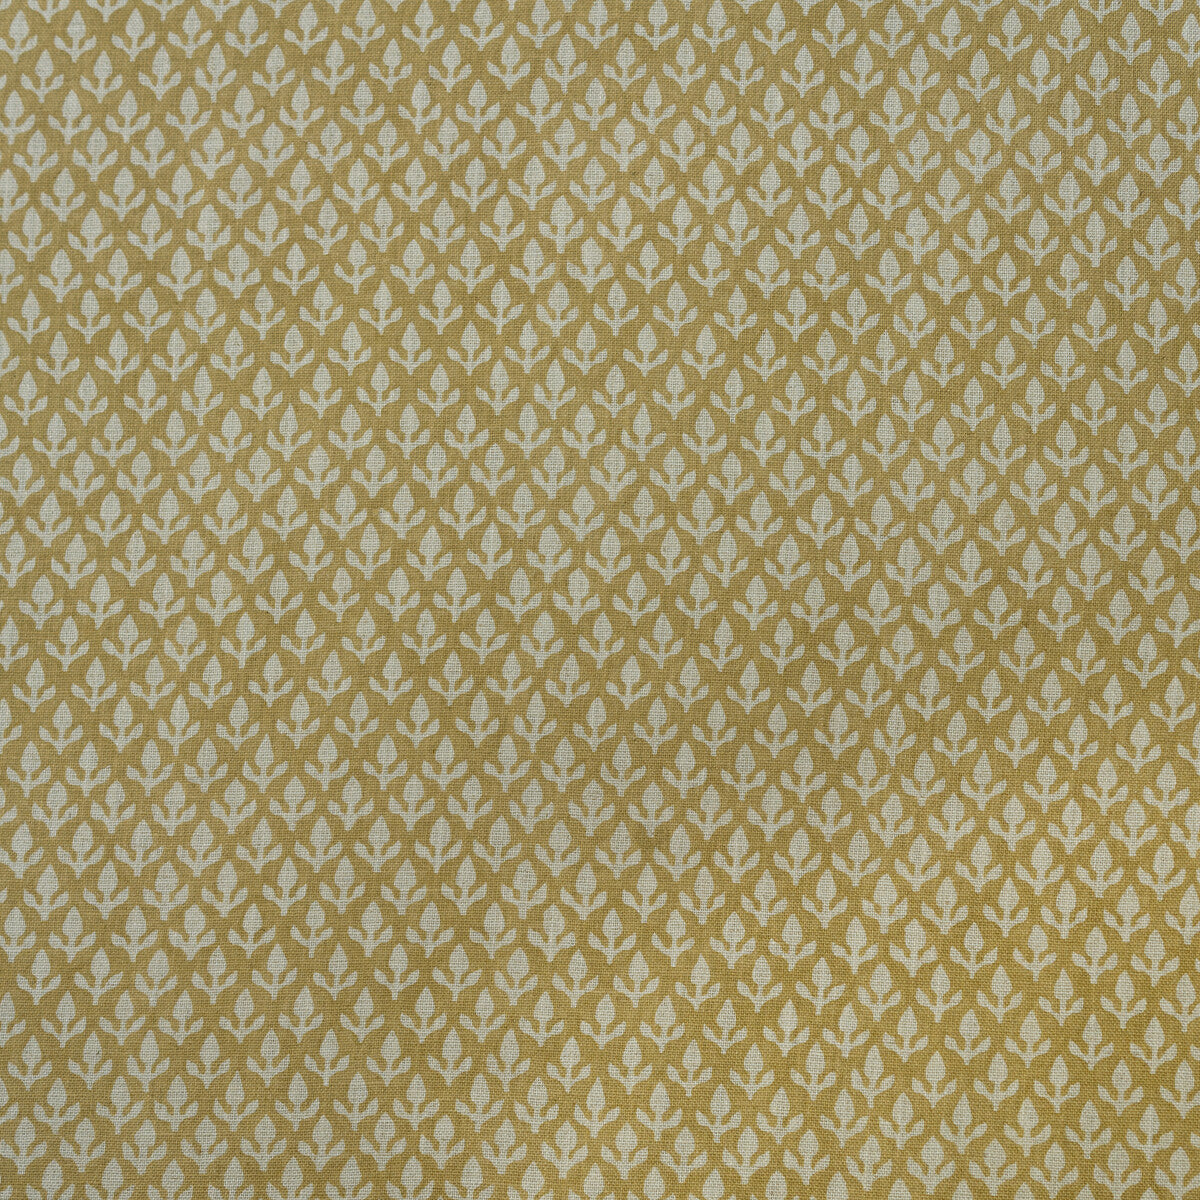 Bud fabric in honey color - pattern AM100379.416.0 - by Kravet Couture in the Andrew Martin Garden Path collection